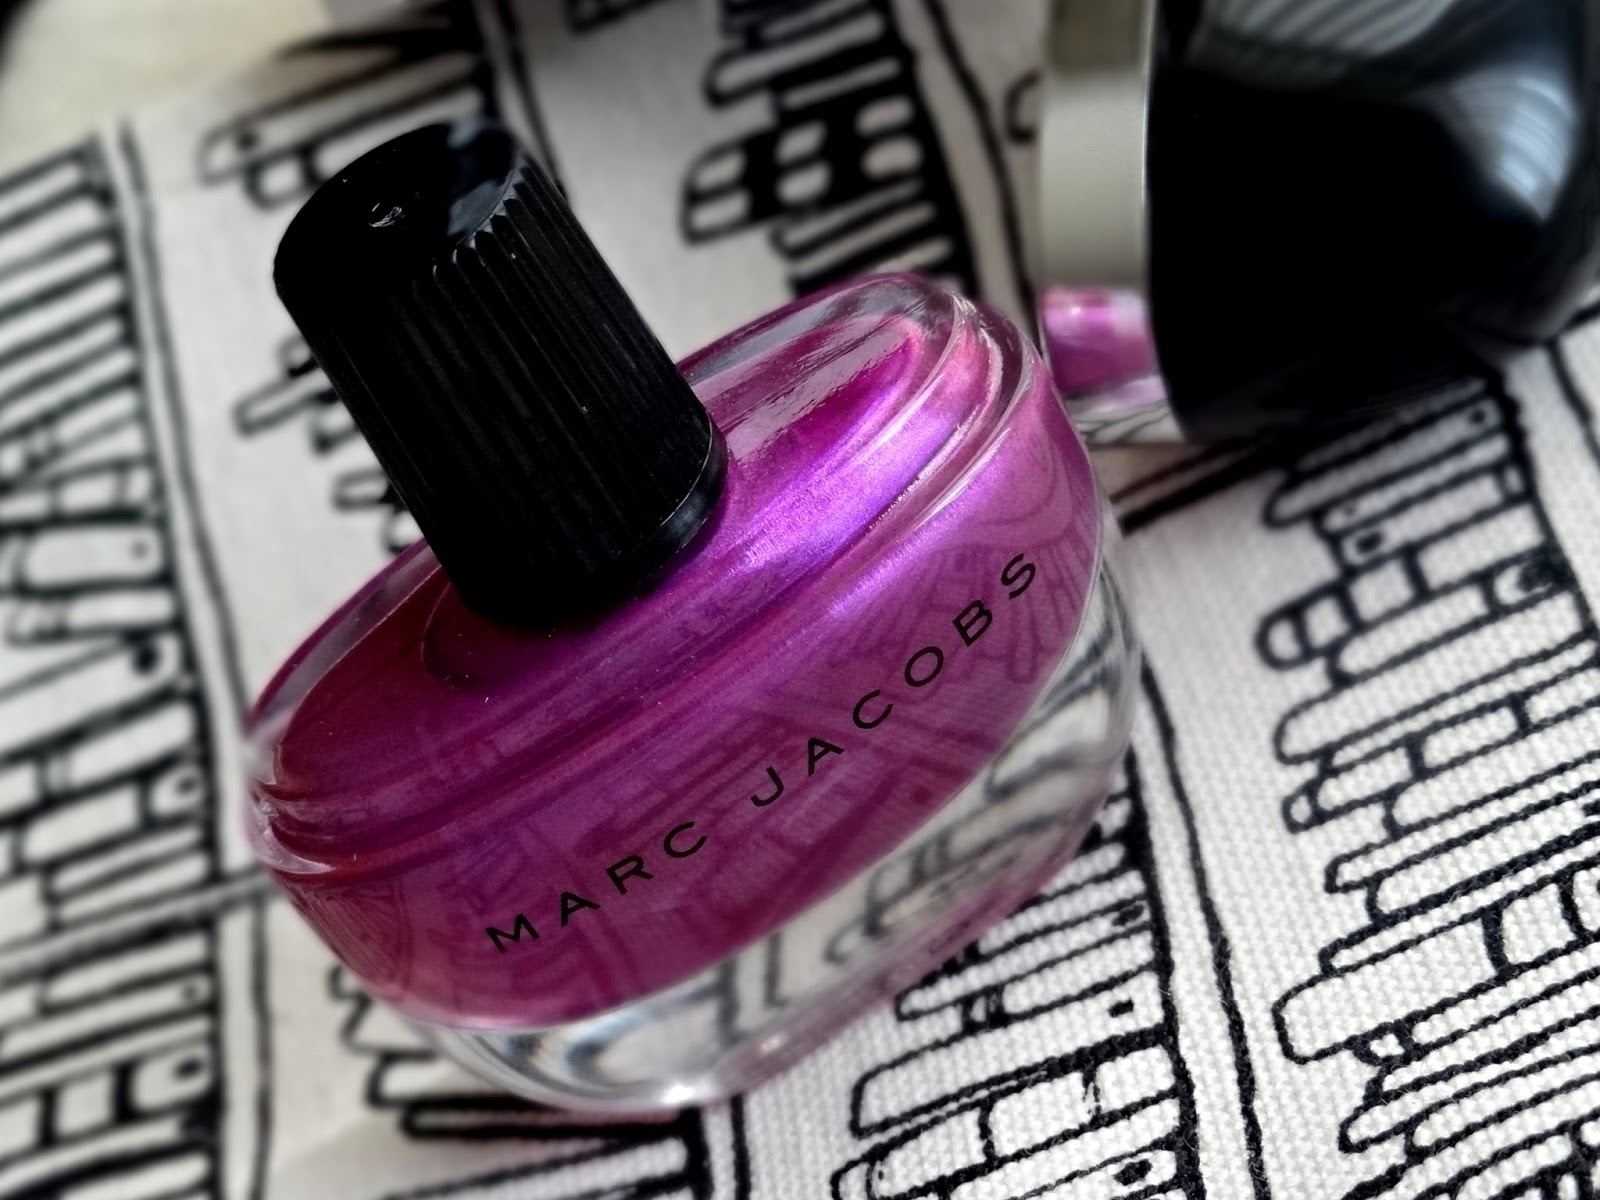 Marc Jacobs Enamored Hi-Shine Nail Lacquer in Oui!